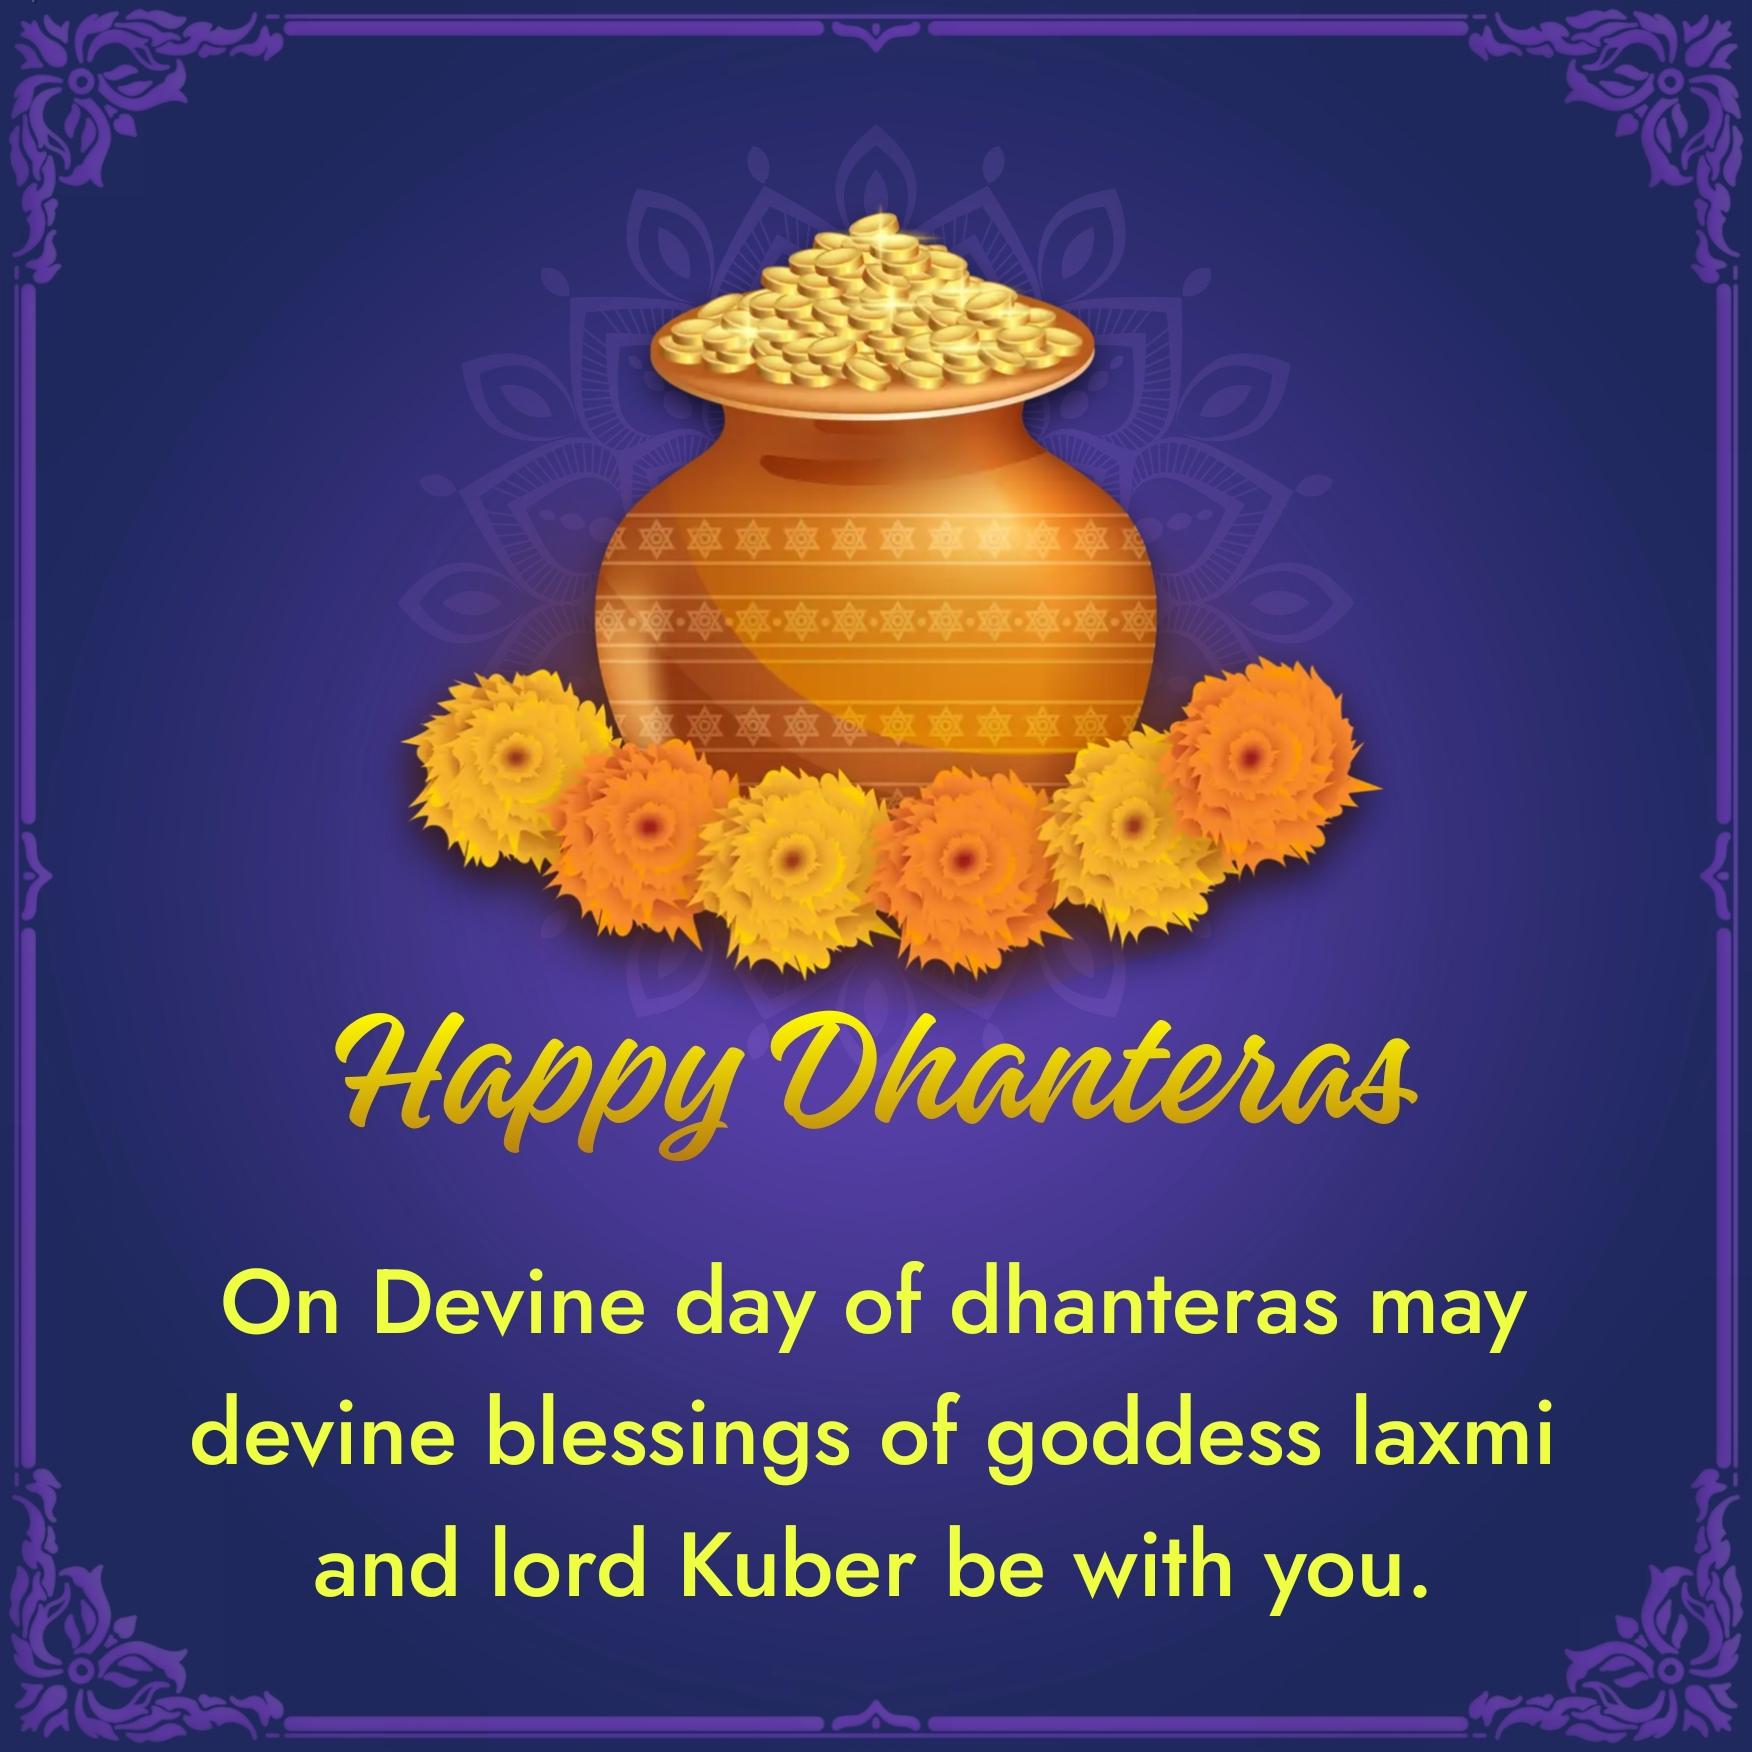 On Devine day of dhanteras may devine blessings